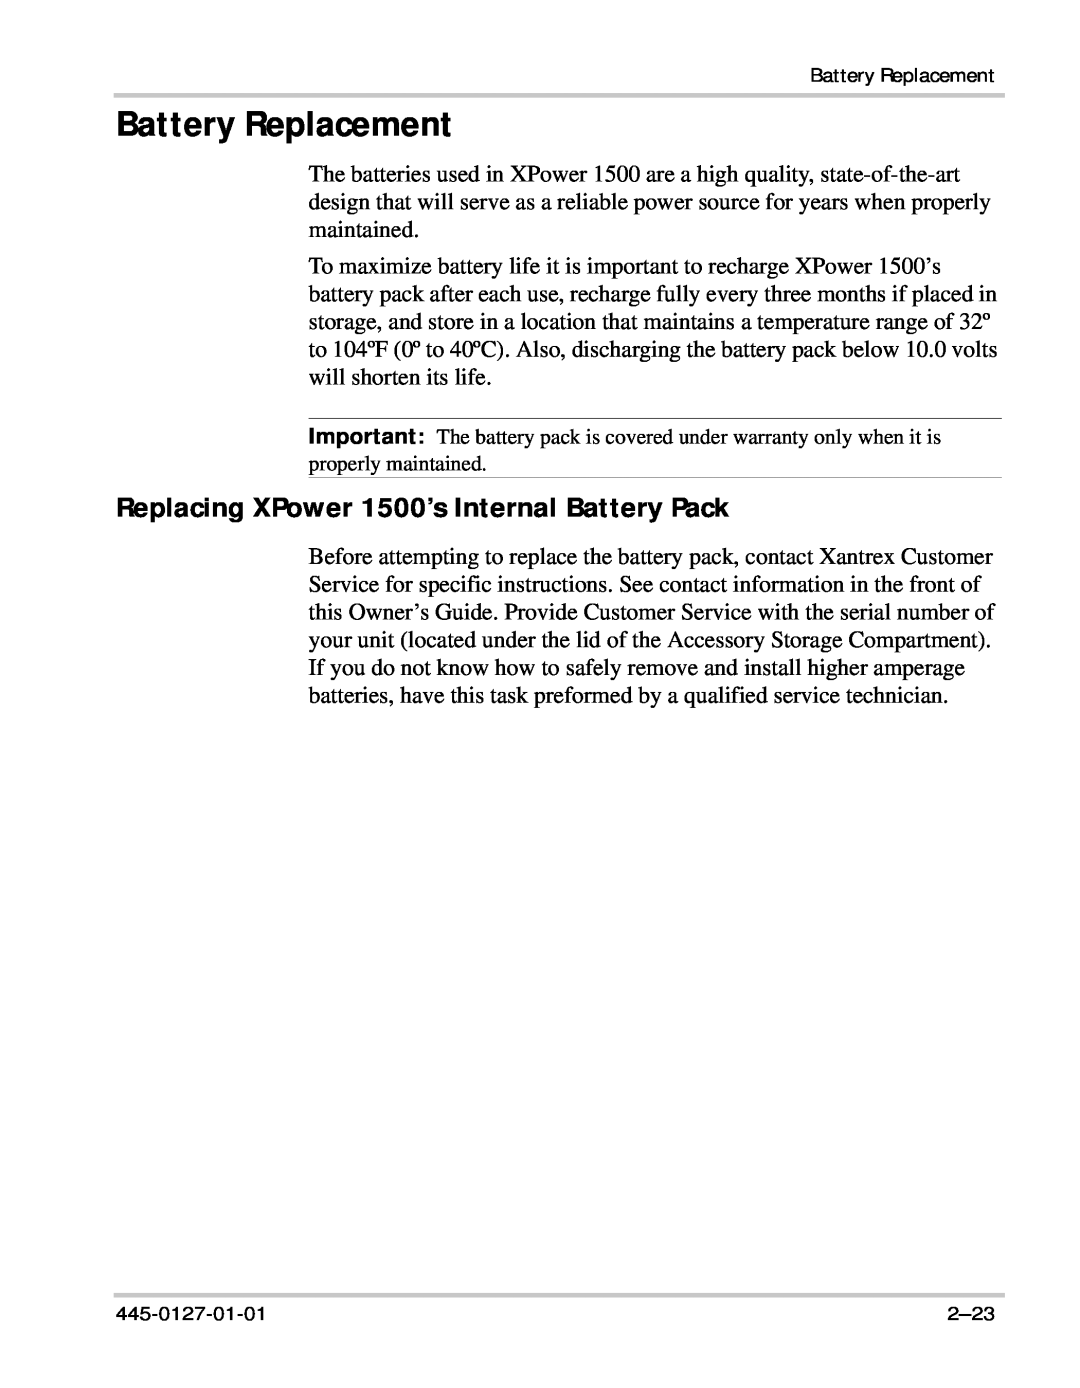 Xantrex Technology manual Battery Replacement, Replacing XPower 1500’s Internal Battery Pack 